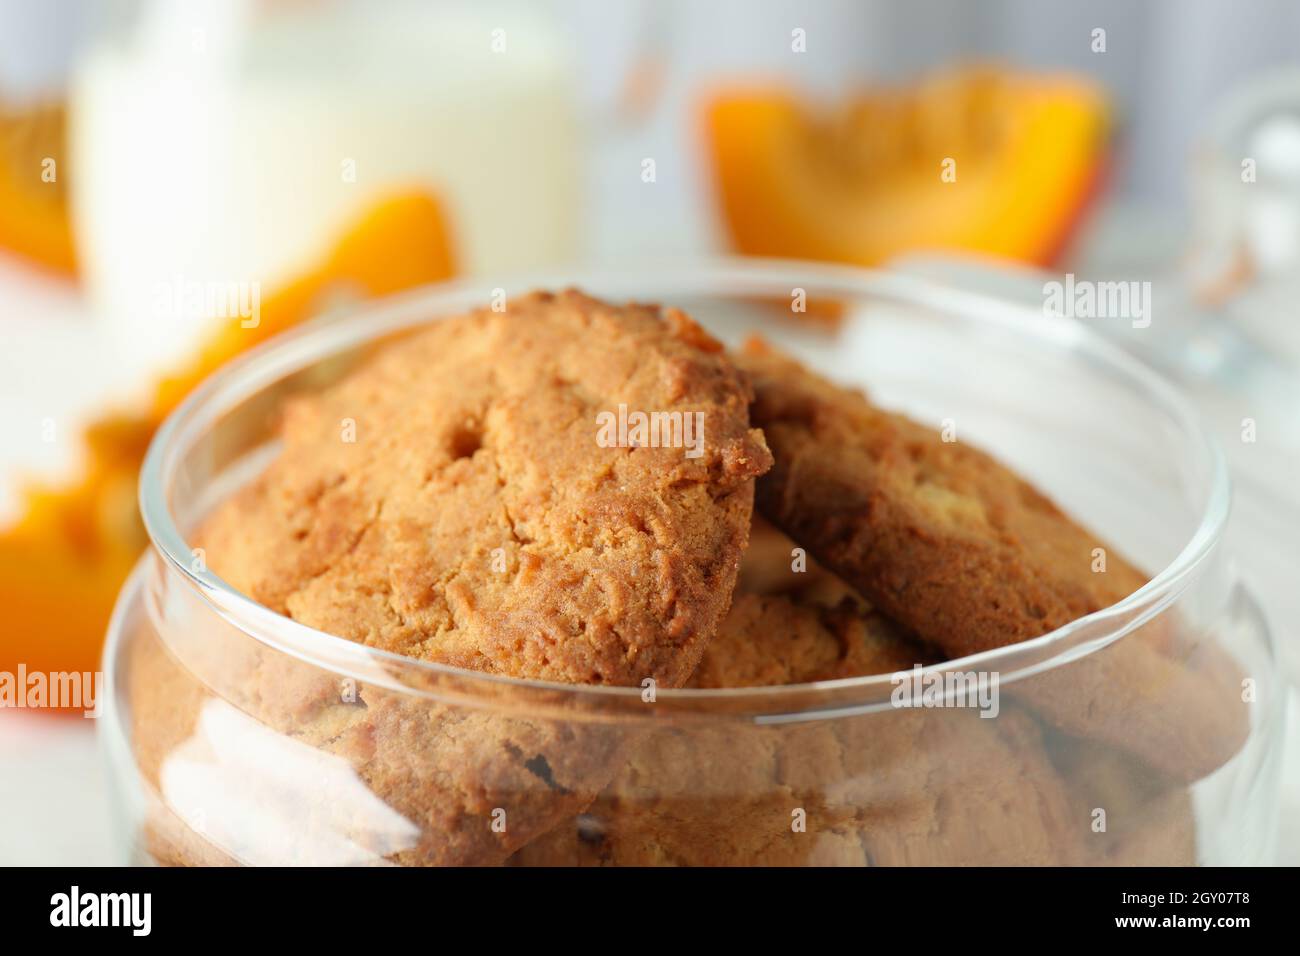 Concept of tasty food with pumpkin cookies, close up. Stock Photo